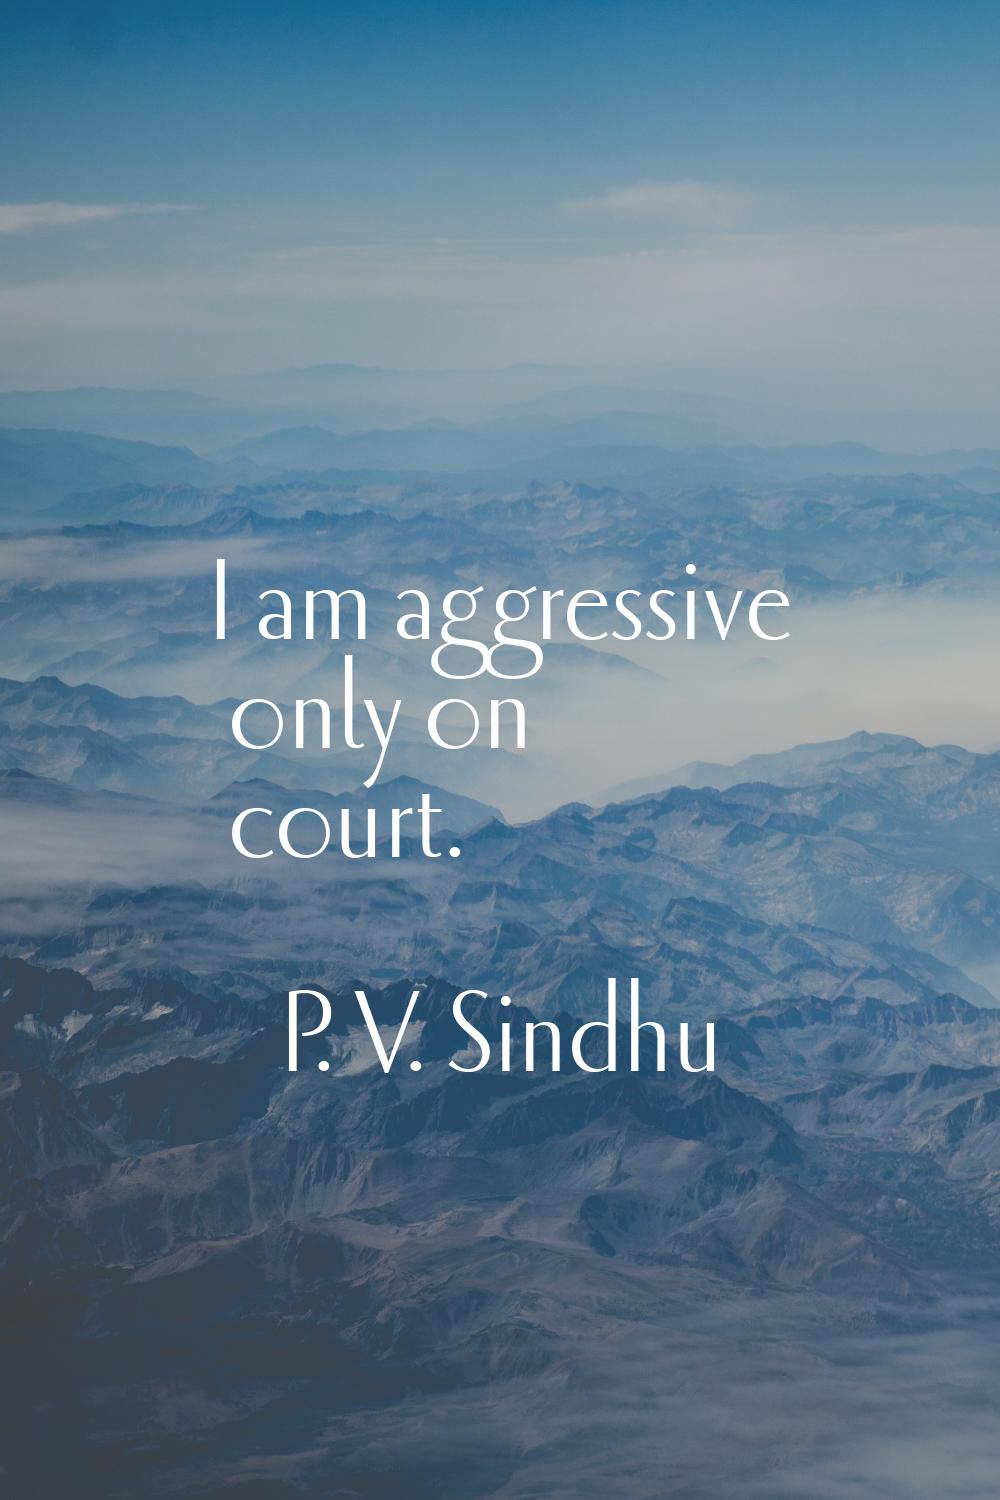 I am aggressive only on court.